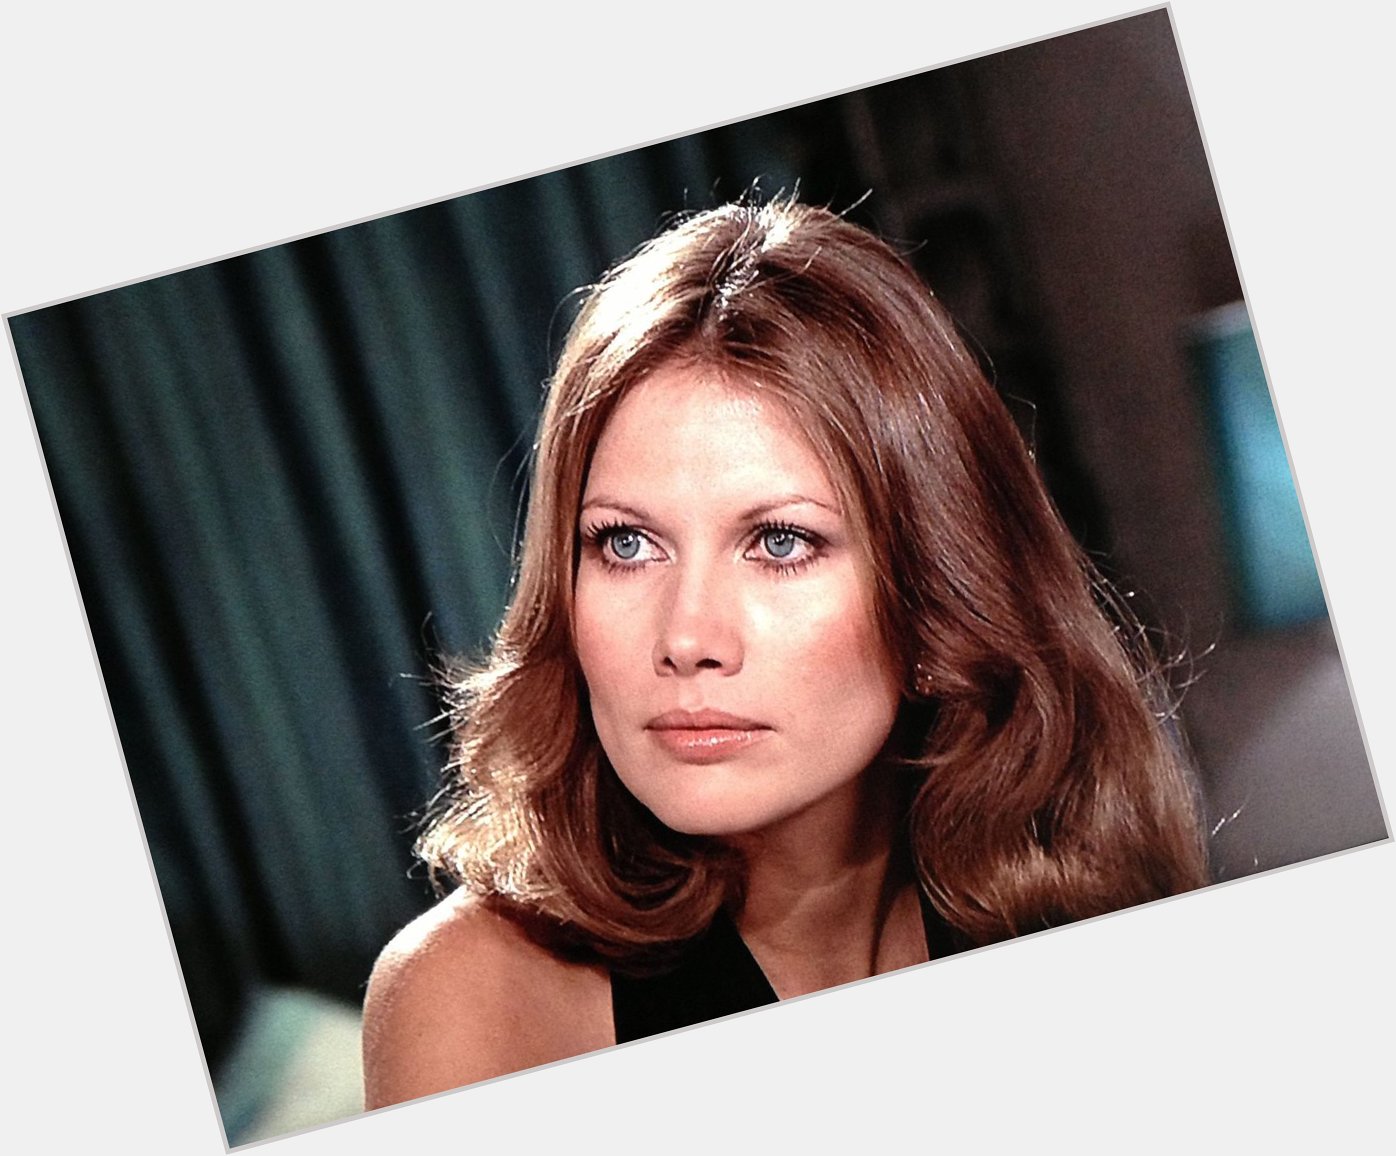 Two actors, two birthdays, four characters- happy birthday to Maud Adams and Joe Bon Baker! 